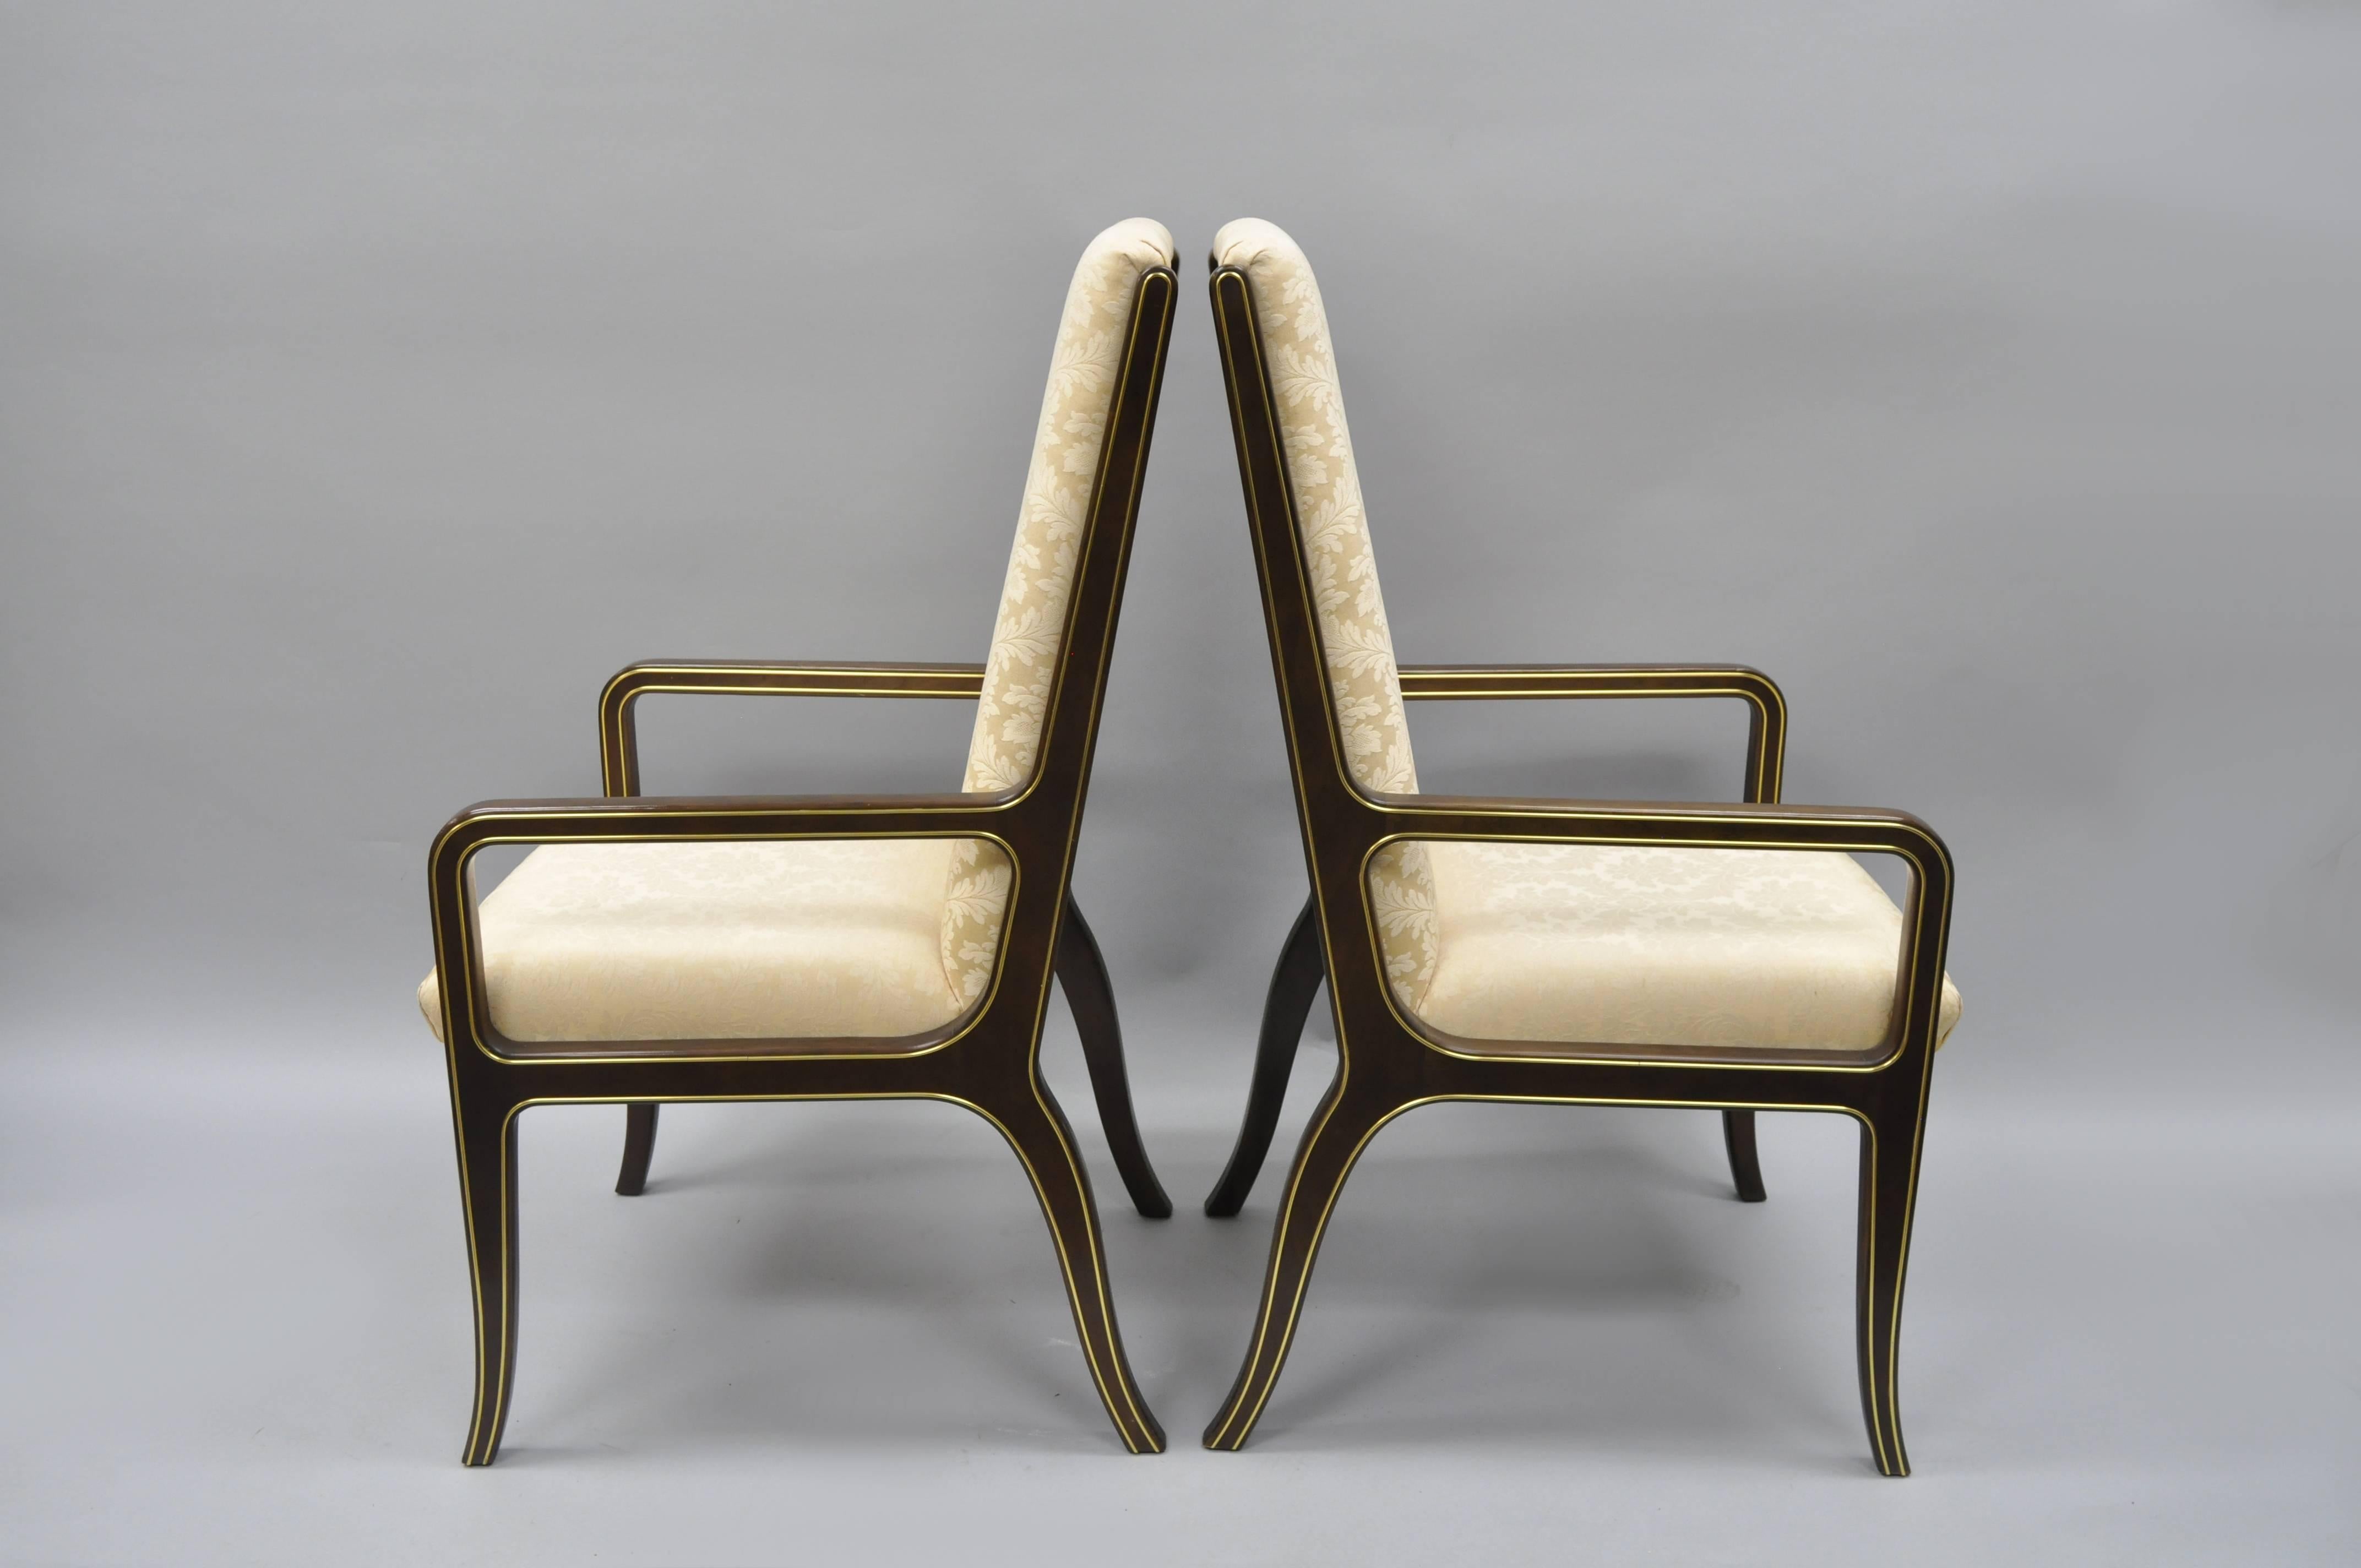 High quality pair of Mastercraft for Baker Furniture Co. Mid-Century Modernist armchairs. Chair feature sculptural solid wood frames (believed to be solid mahogany) with brass inlaid trim throughout and upholstered seats and backs. This clean lined